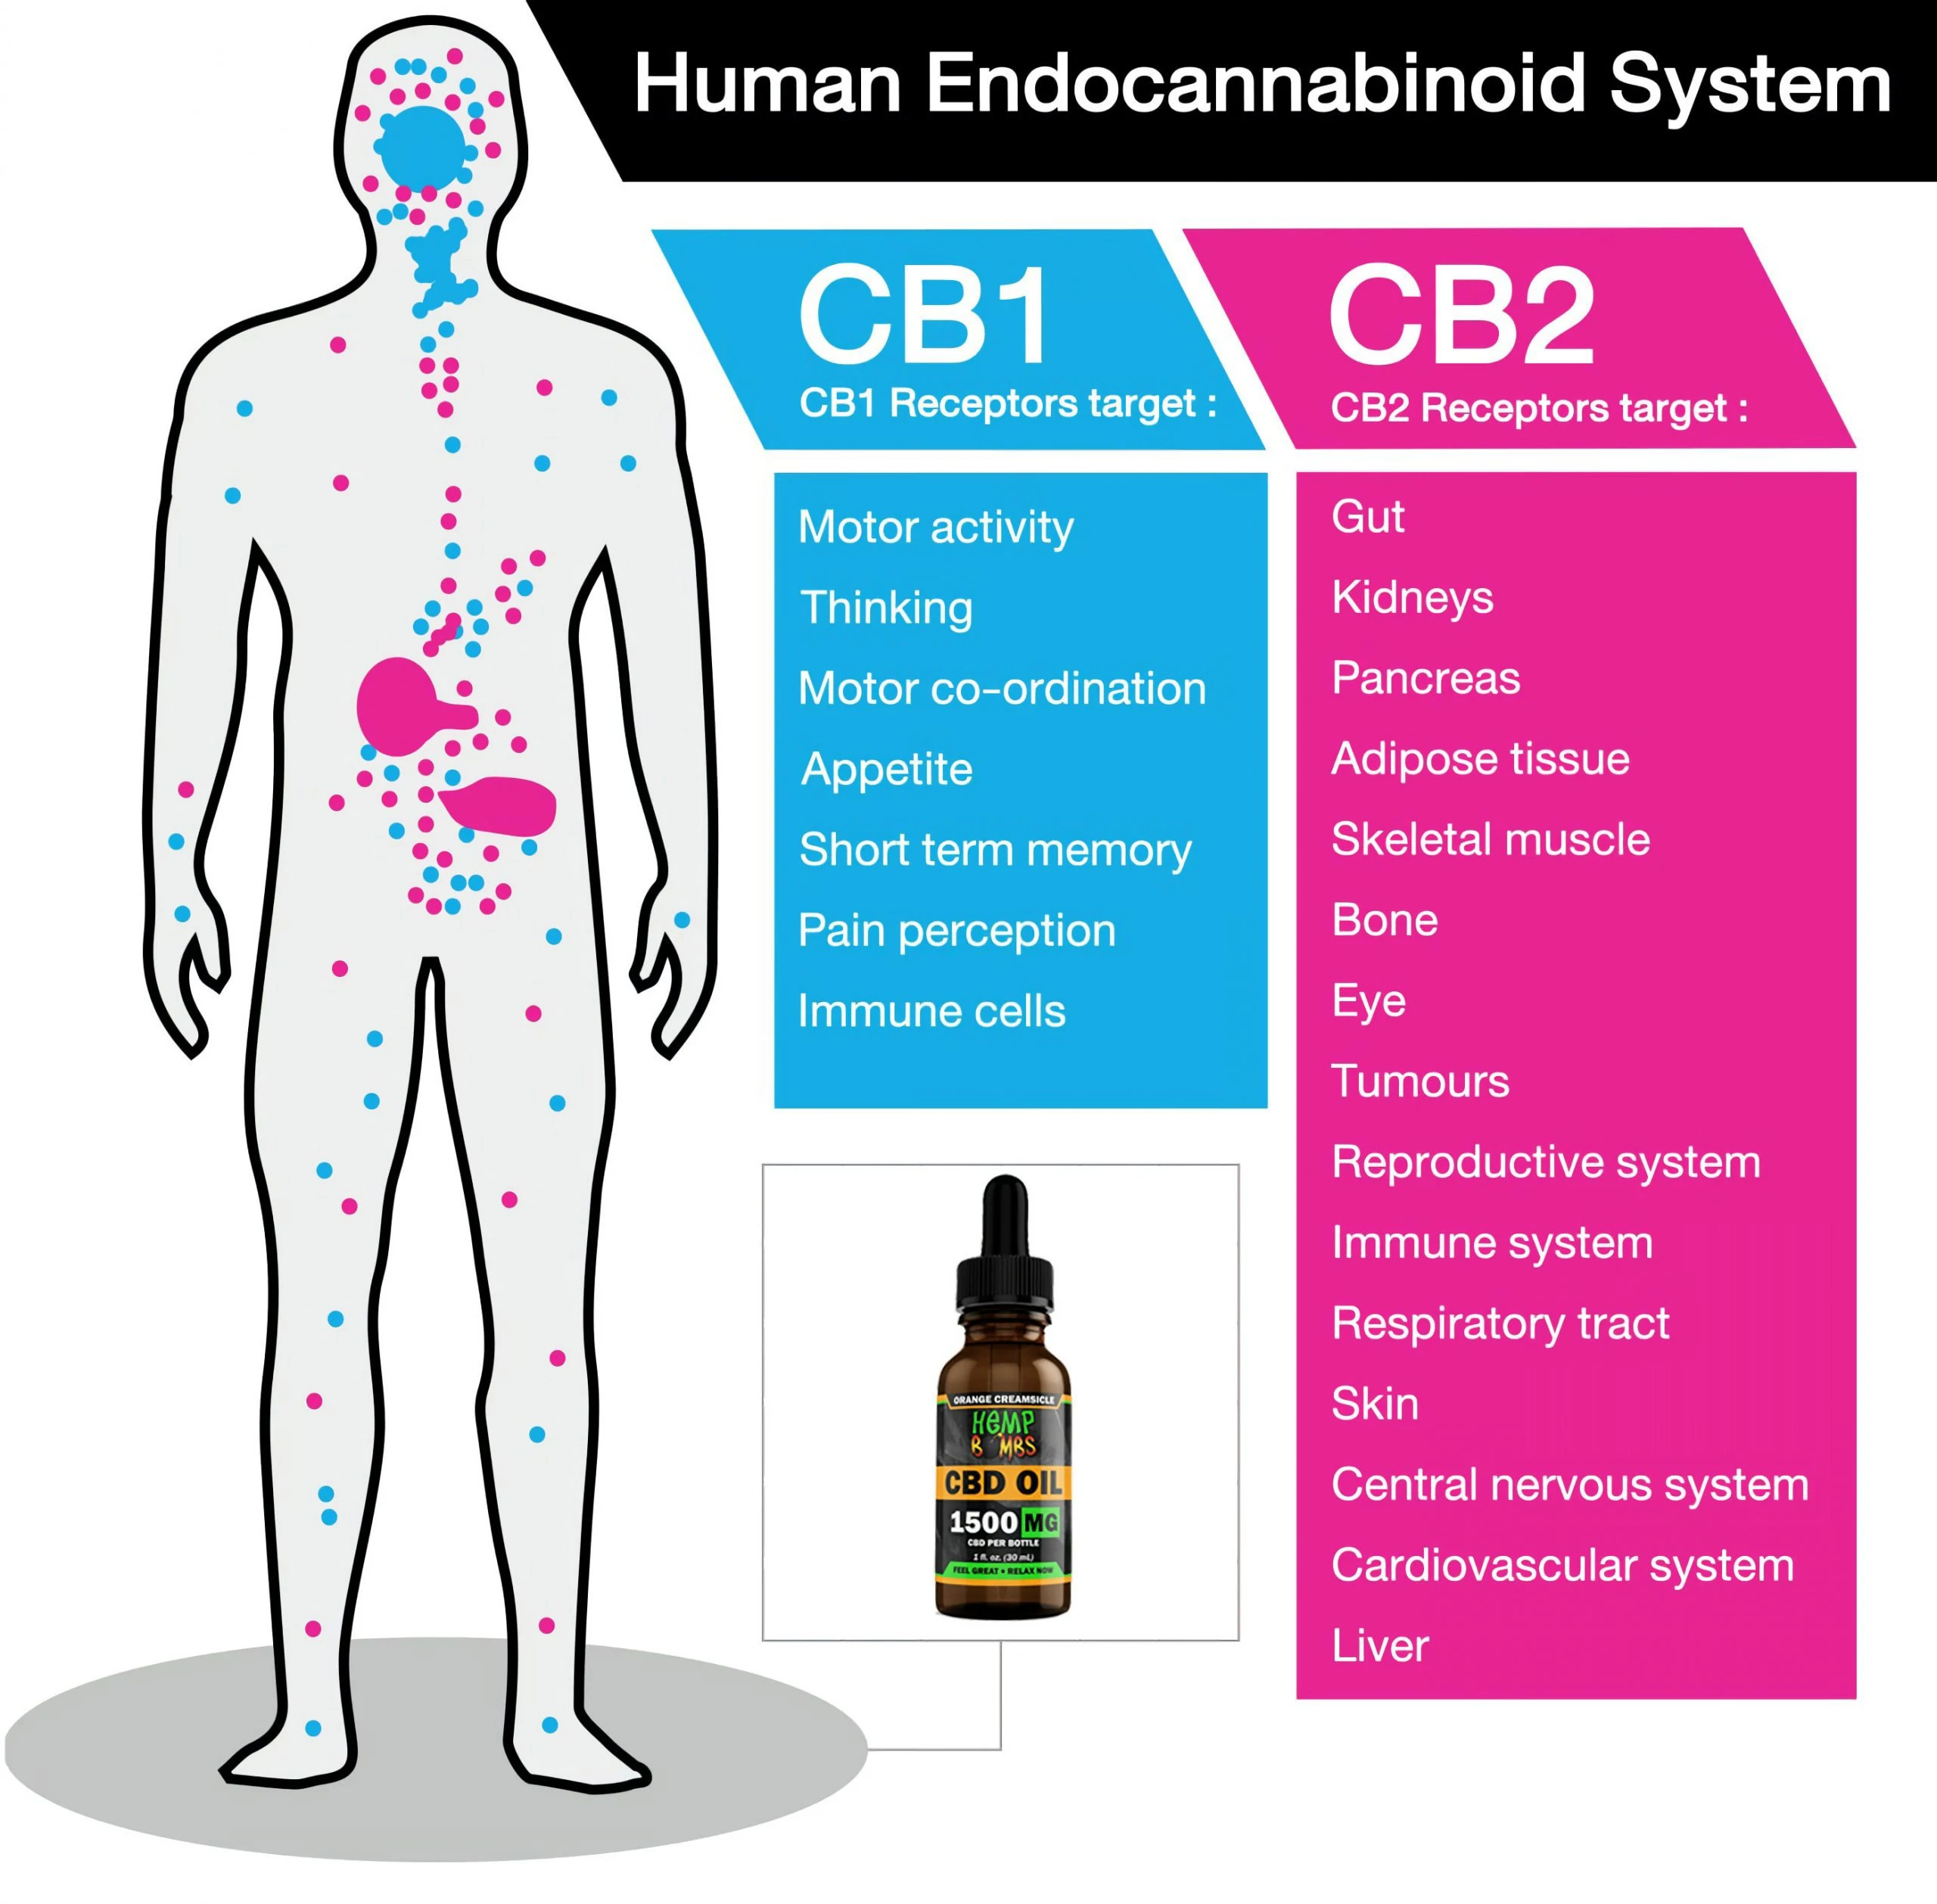 CBD takes over the endocannabinoid system and might encourage your system to produce more endocannabinoids, which helps your body maintain balance